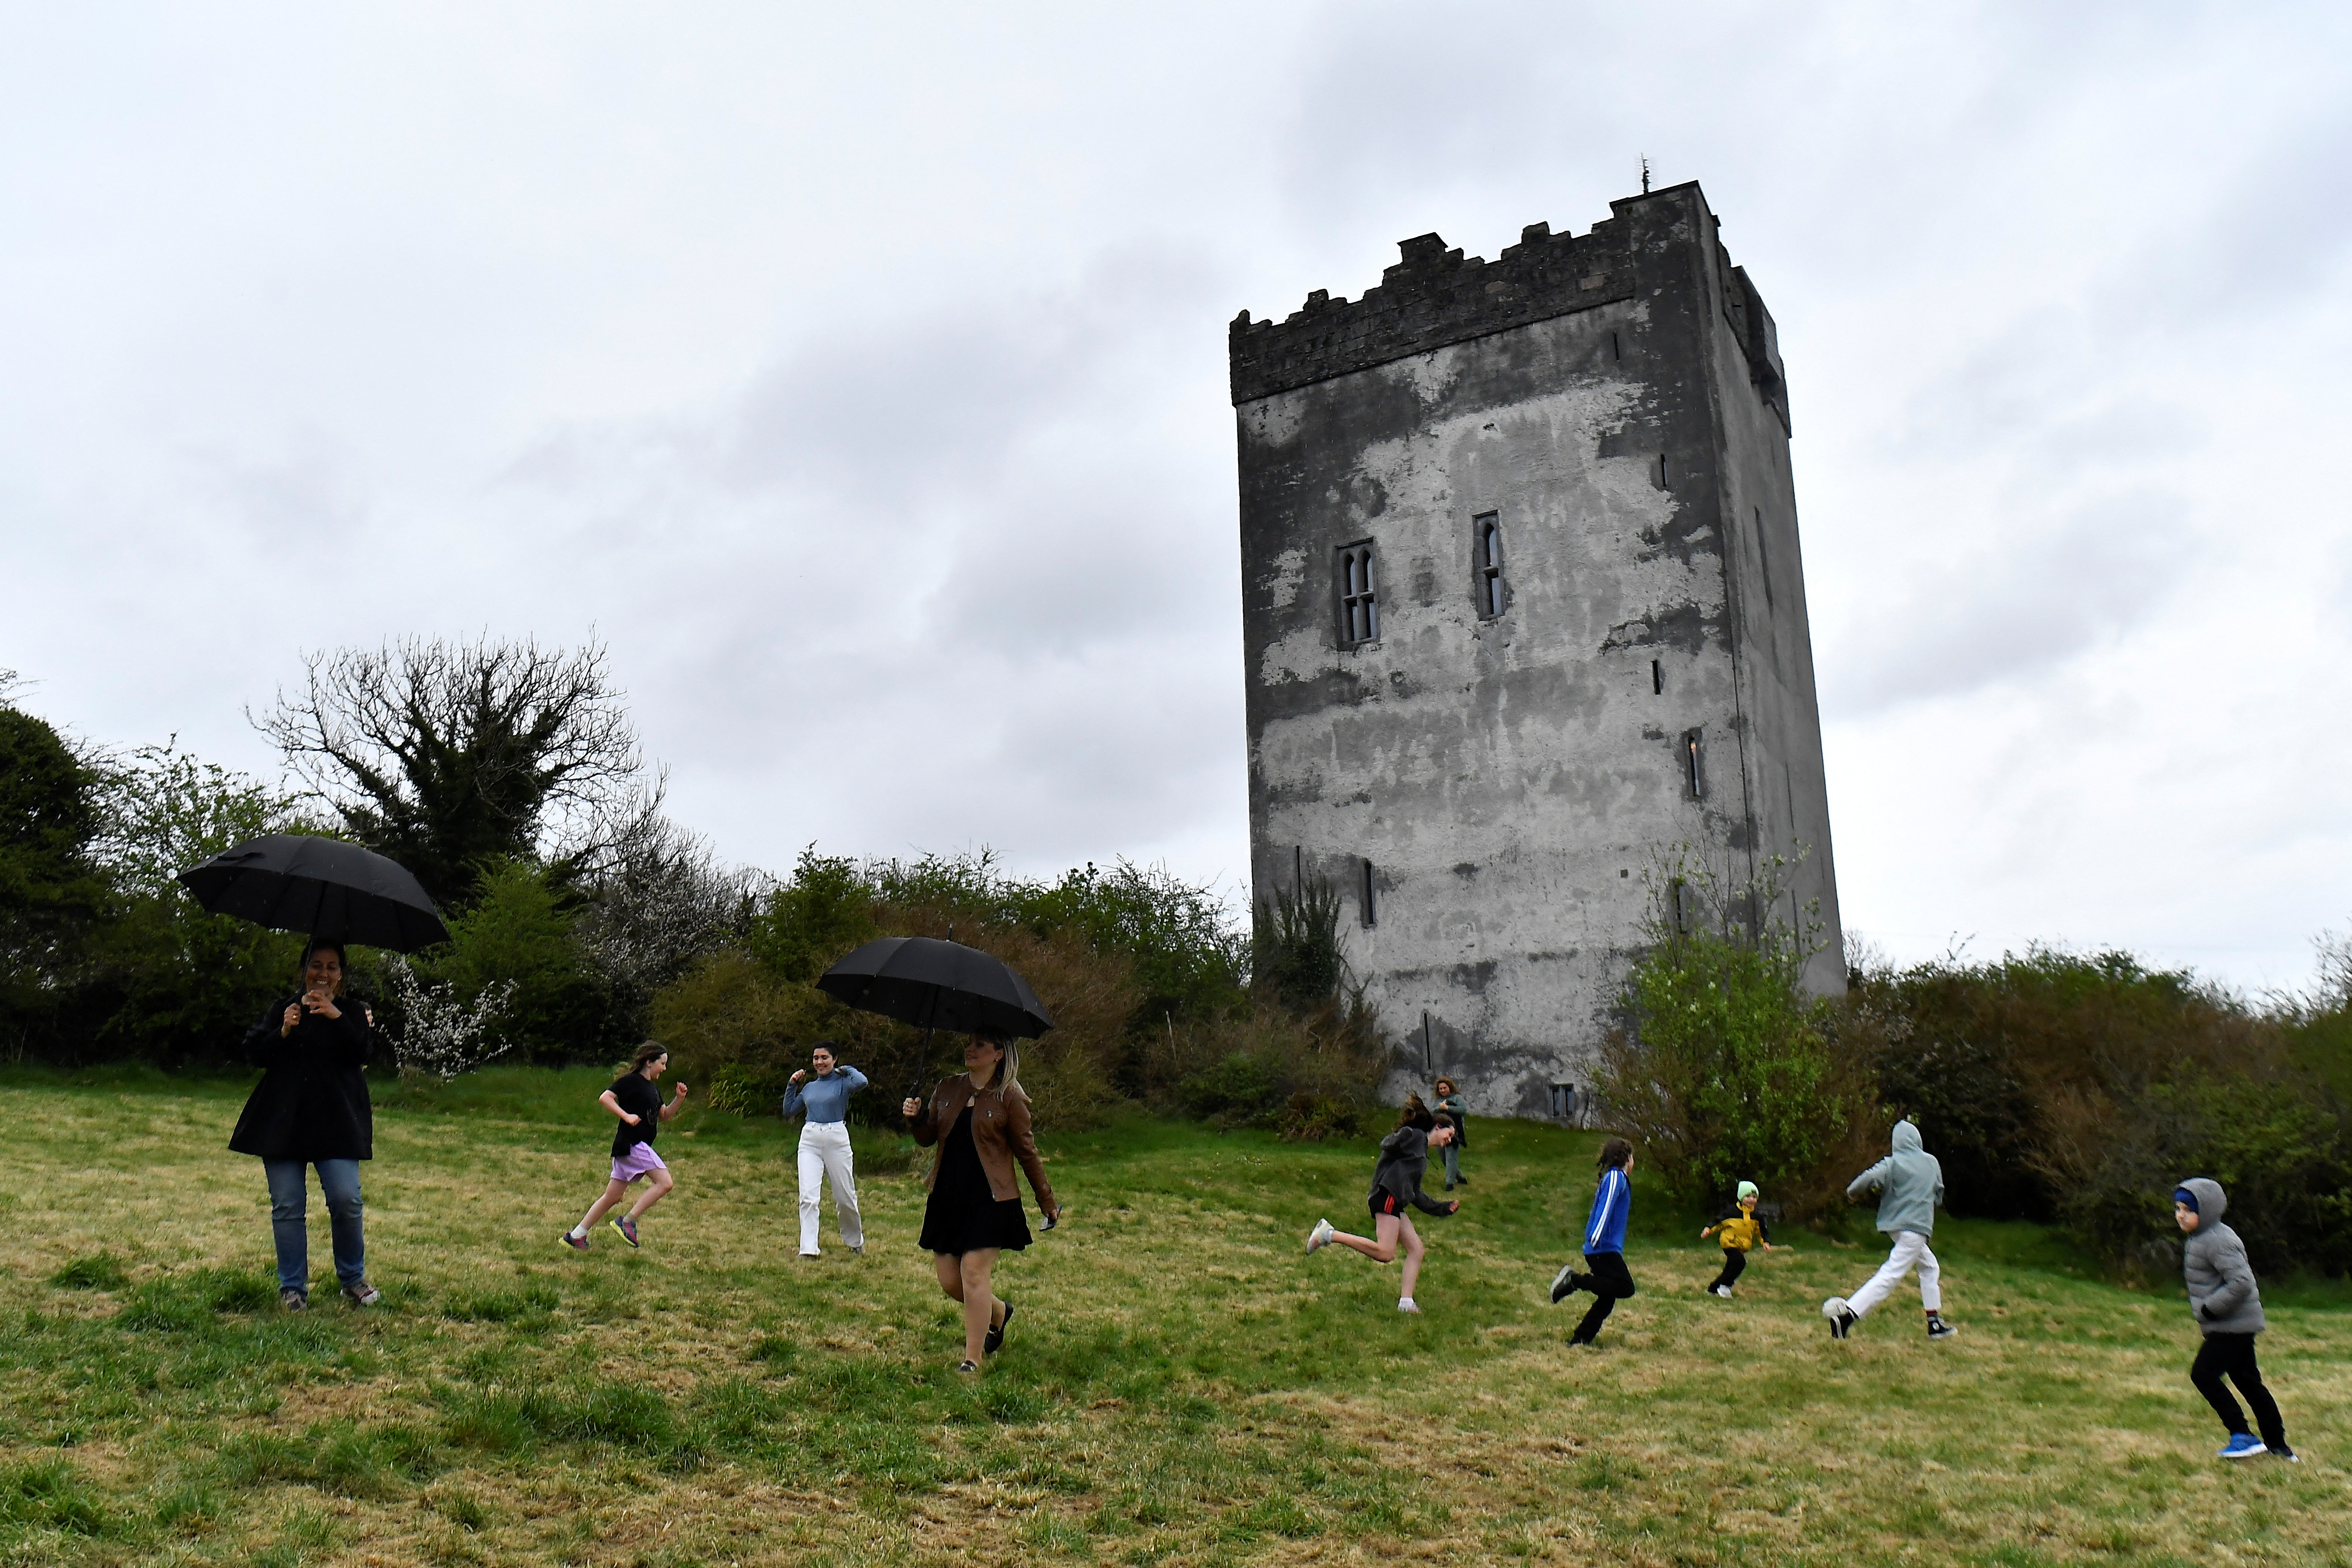 Owner of 15th Century Ballindooley Castle, offers his medieval home to Ukrianian refugees, in Ireland